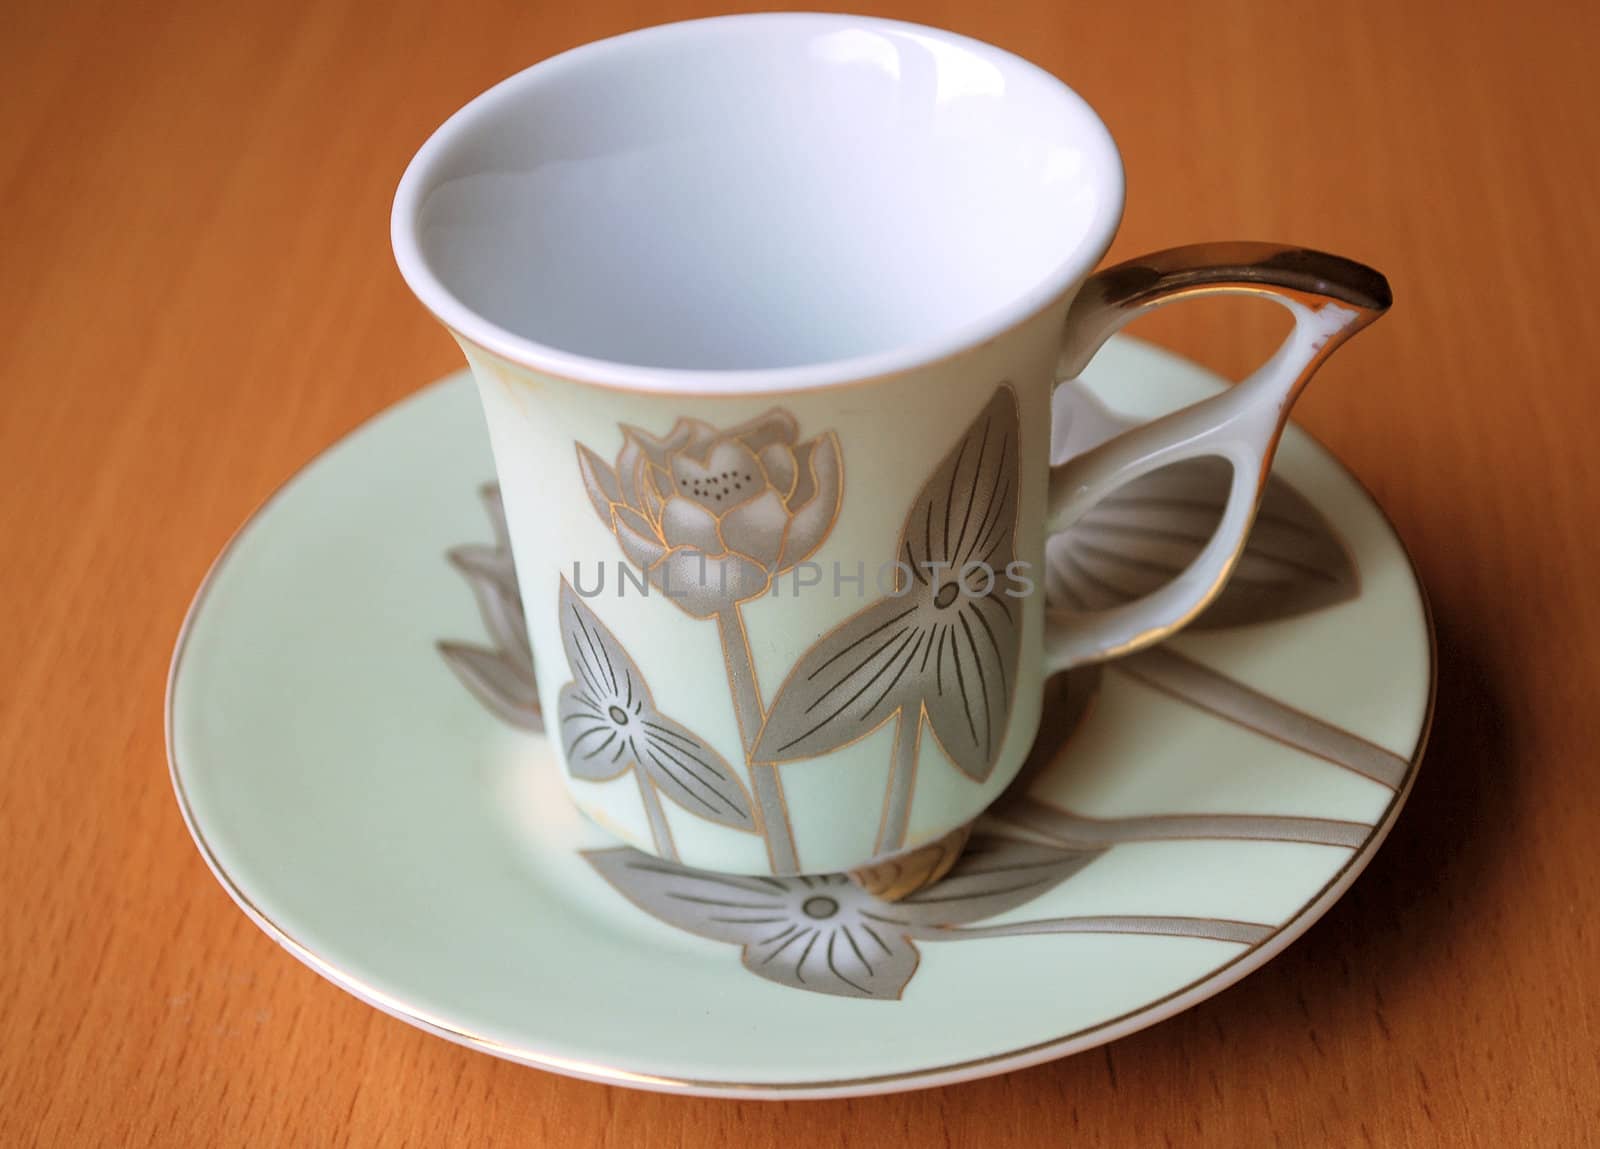 empty cup and saucer  with pattern   by svtrotof